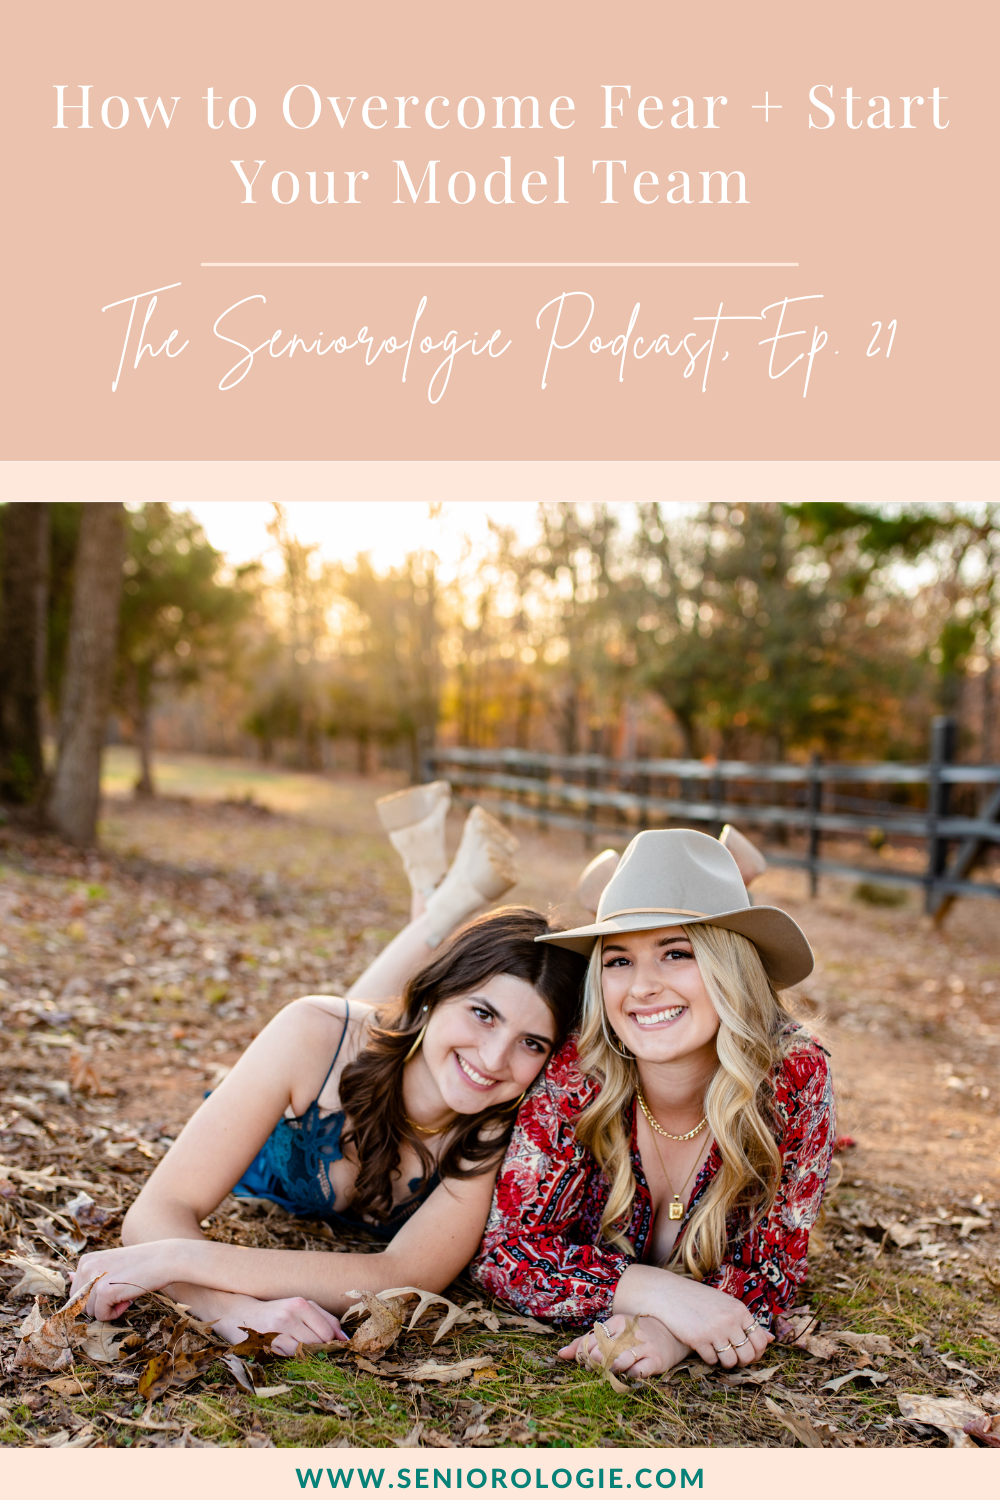 Model team fears and how to overcome them: tips to launch your first senior spokesmodel team as a senior portrait photographer